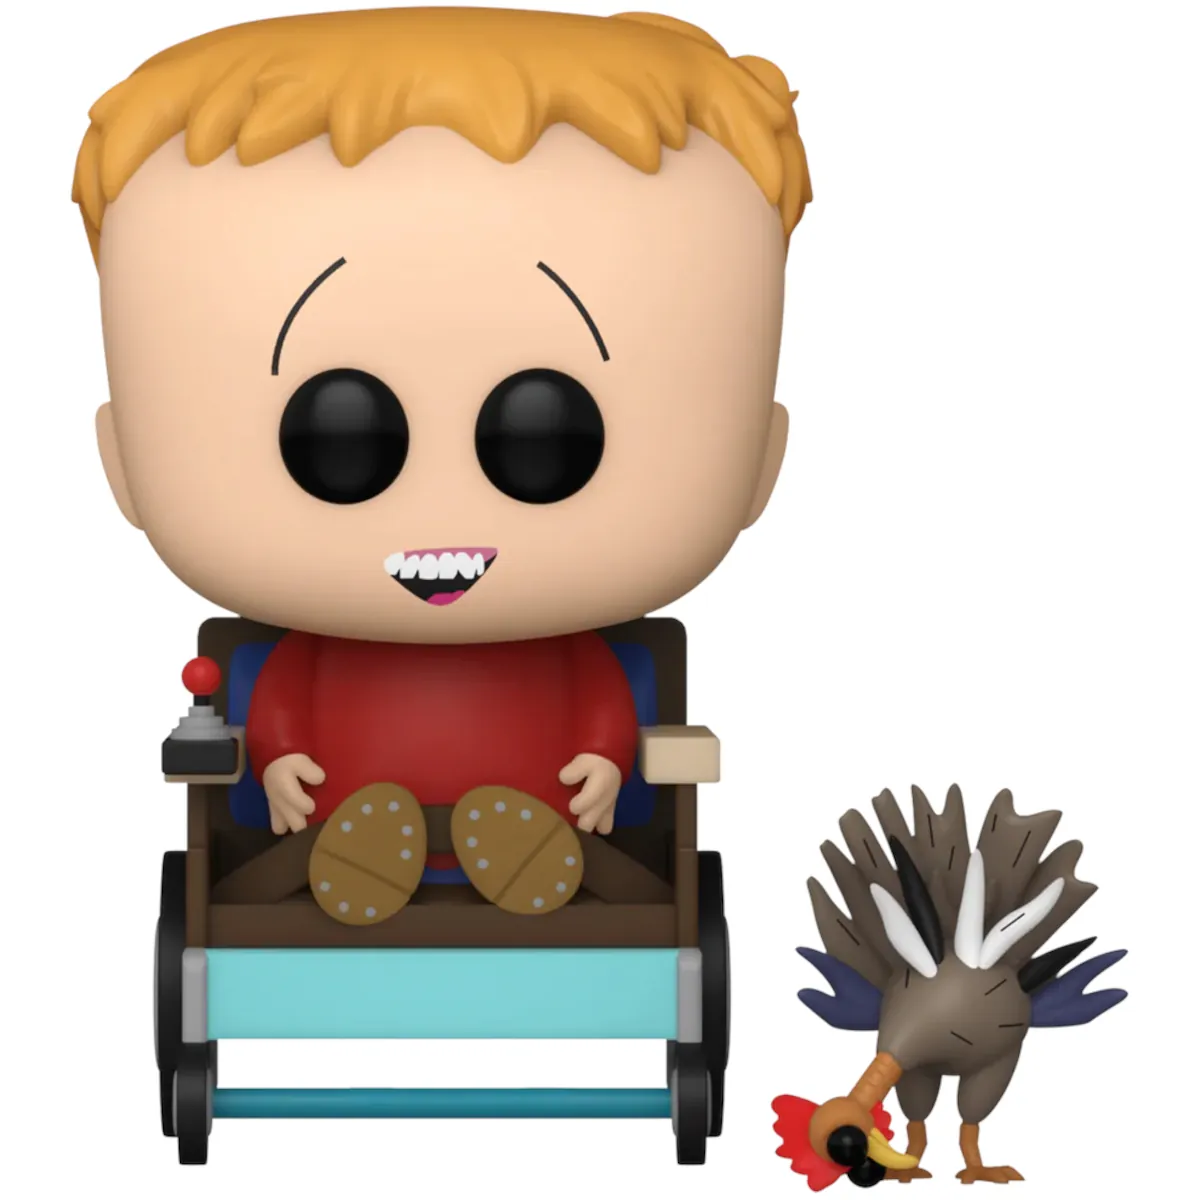 FK34391 Funko Pop! Television - South Park - Timmy & Gobbles Collectable Vinyl Figure